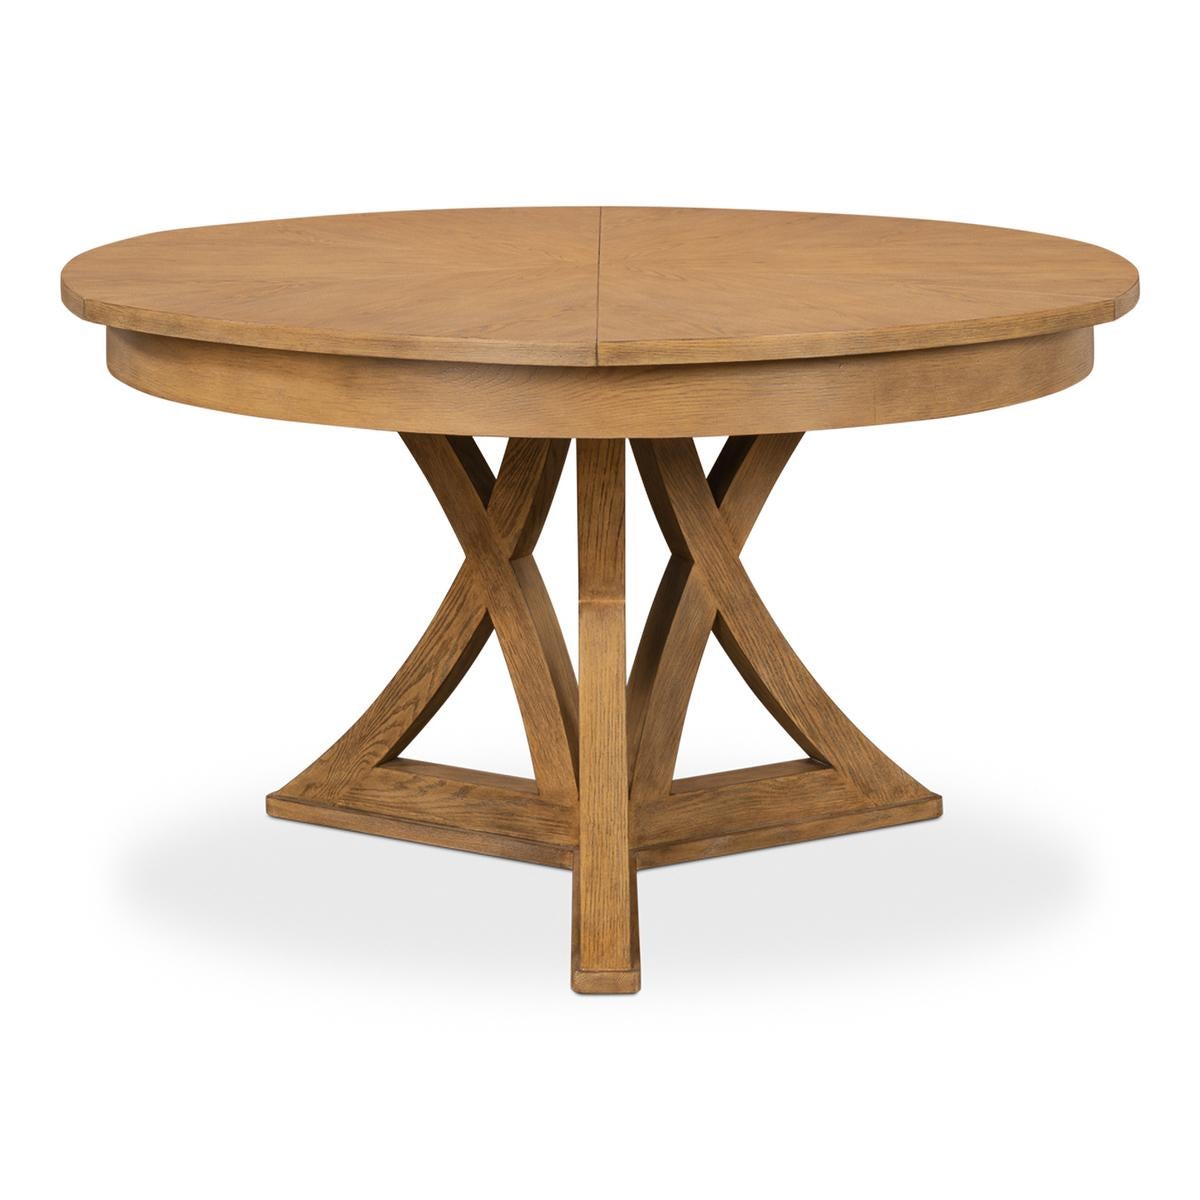 A Transitional Rustic oak round extending dining table. The oak table in our warm finish is a great combination of classic style and modern amenities. Closed it is 54